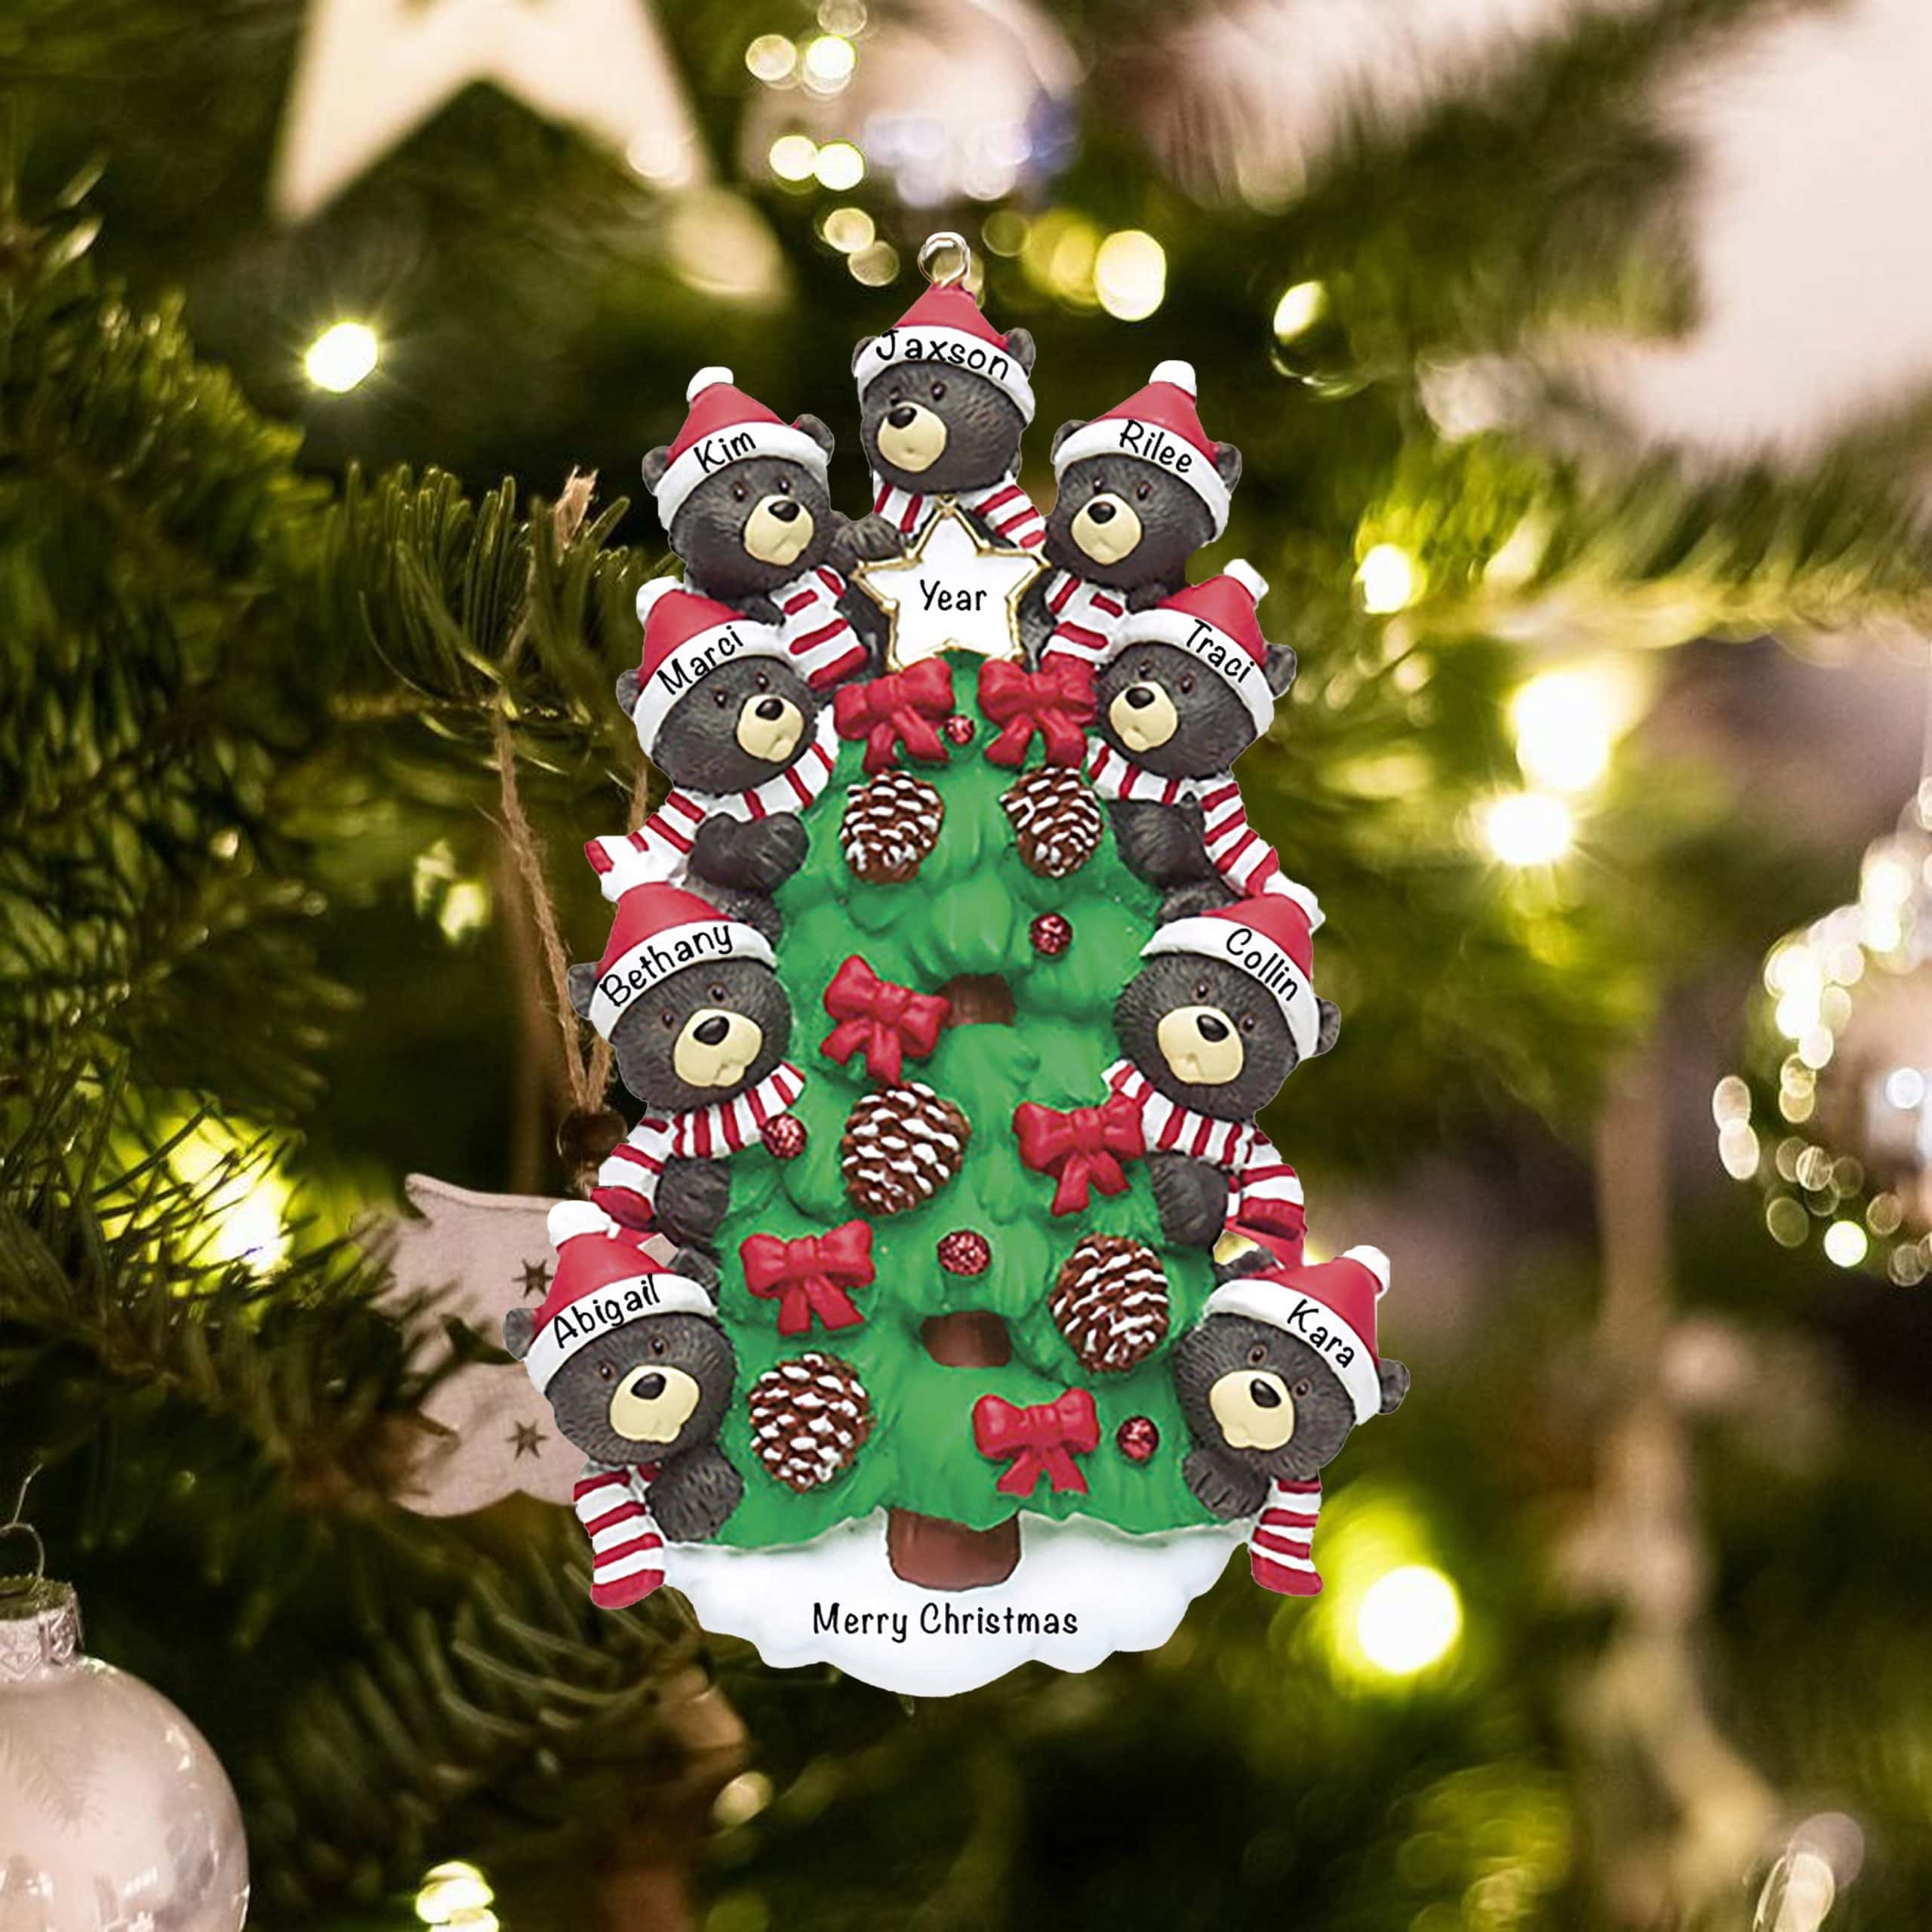 8 & 9 Personalized Christmas Ornaments Bears in Stockings Family of 7 